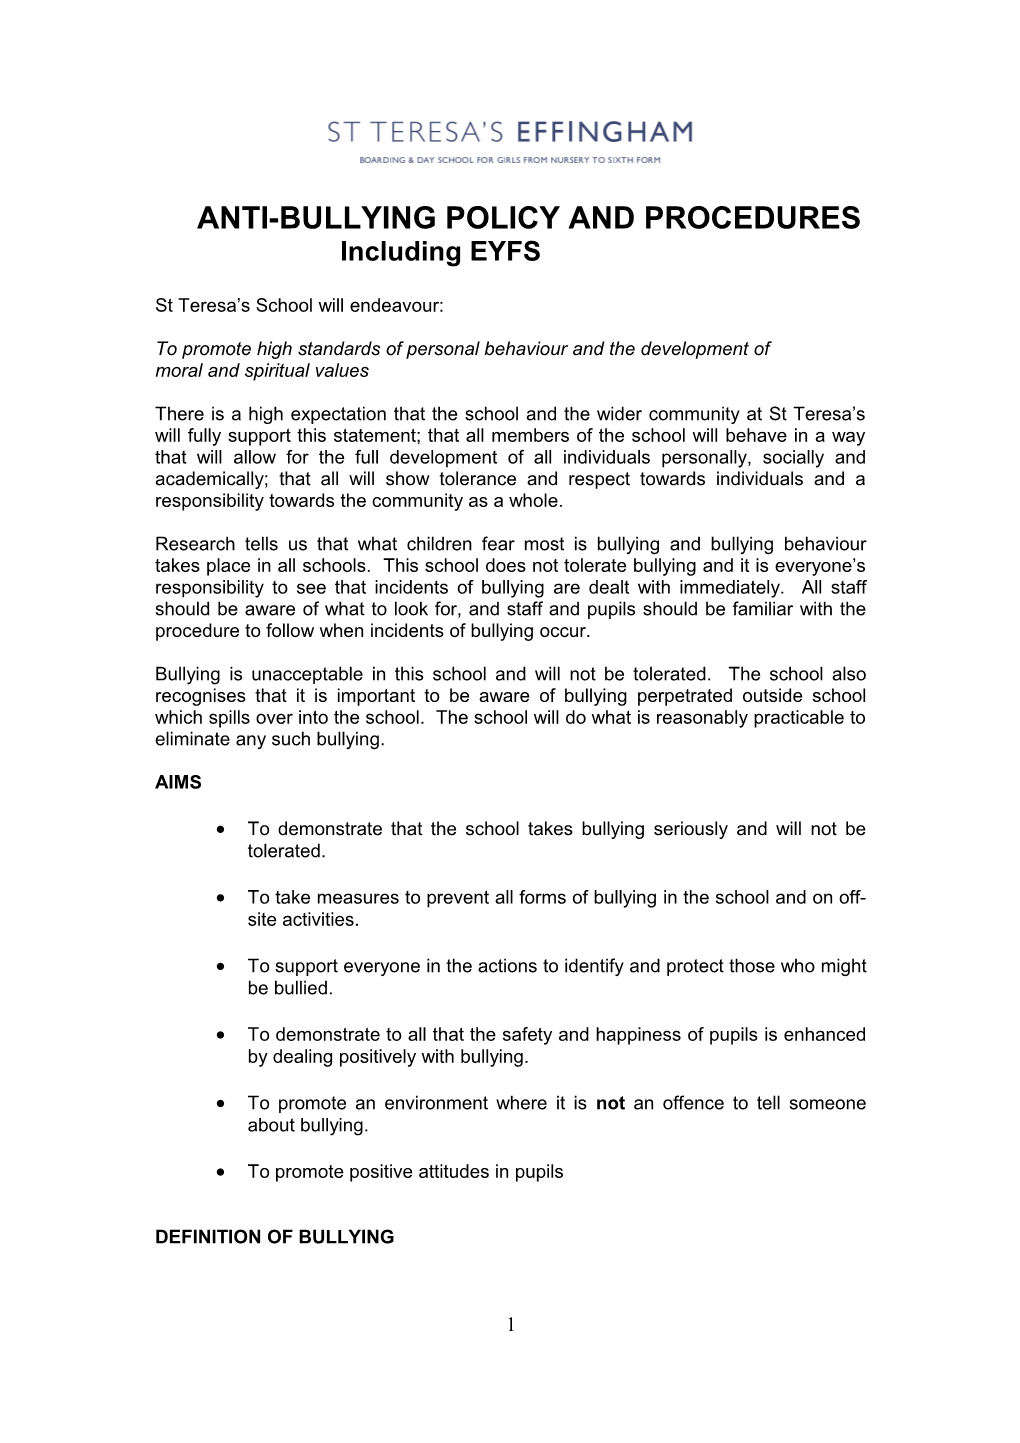 Anti-Bullying Policy and Procedures